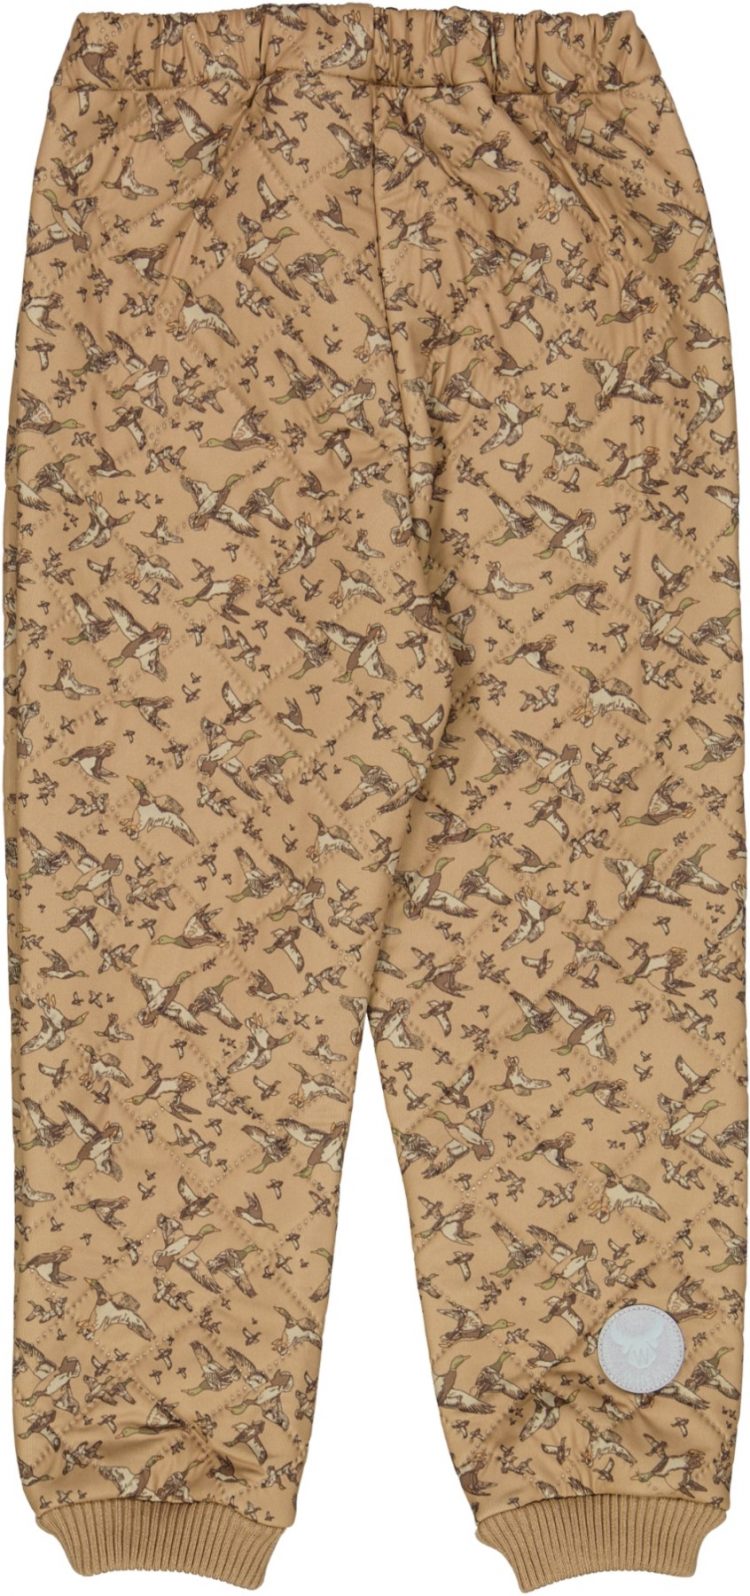 Kids thermo pants with ducks - Wheat